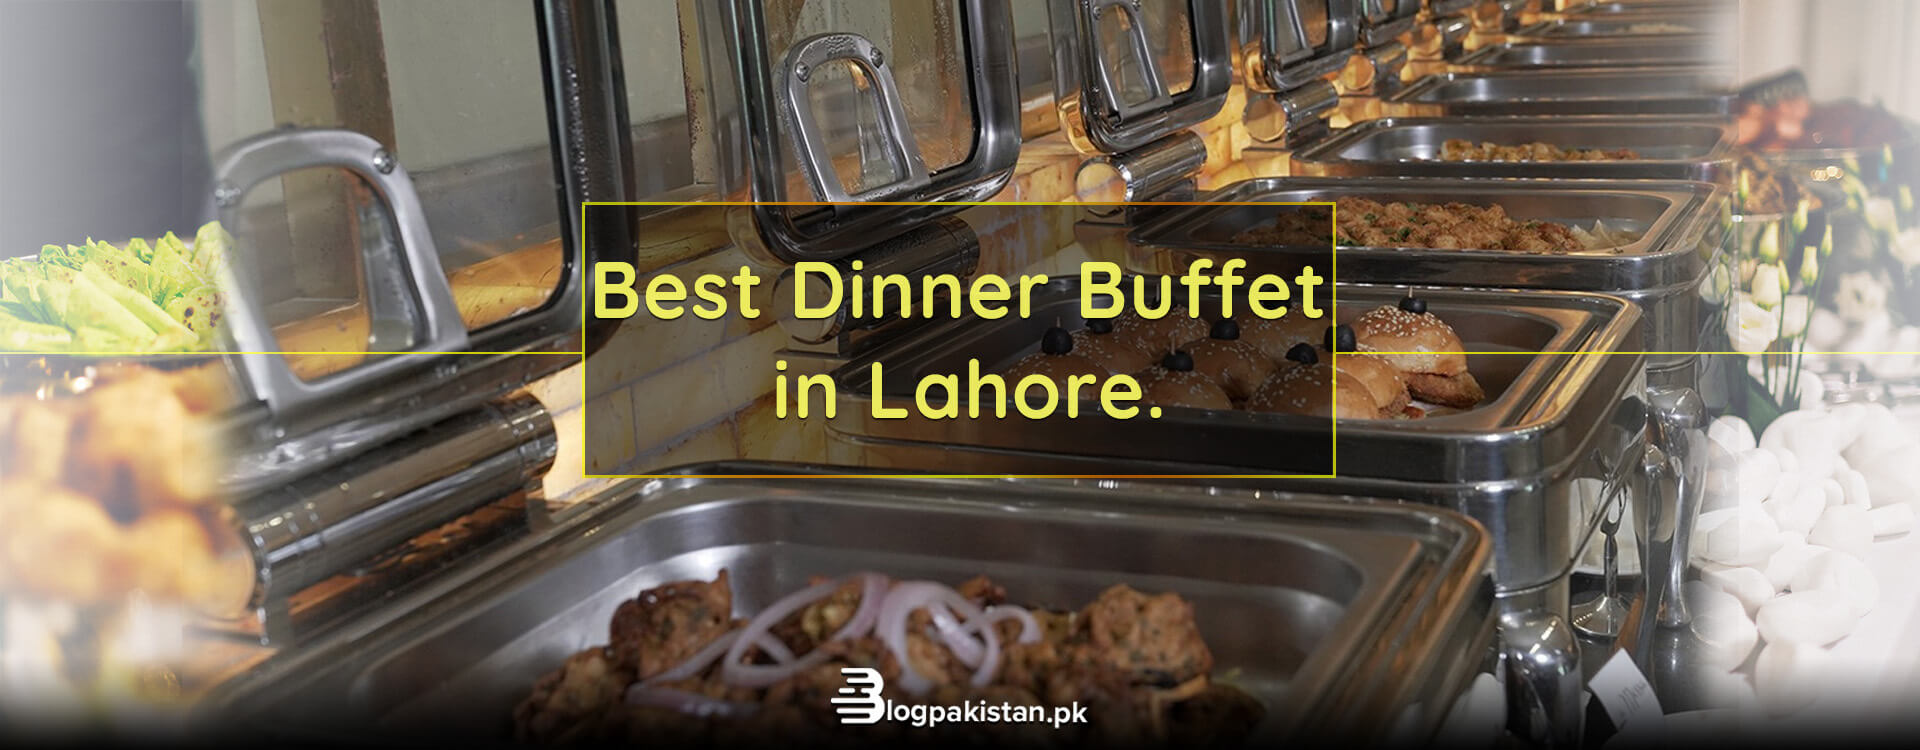 dinner buffet in lahore